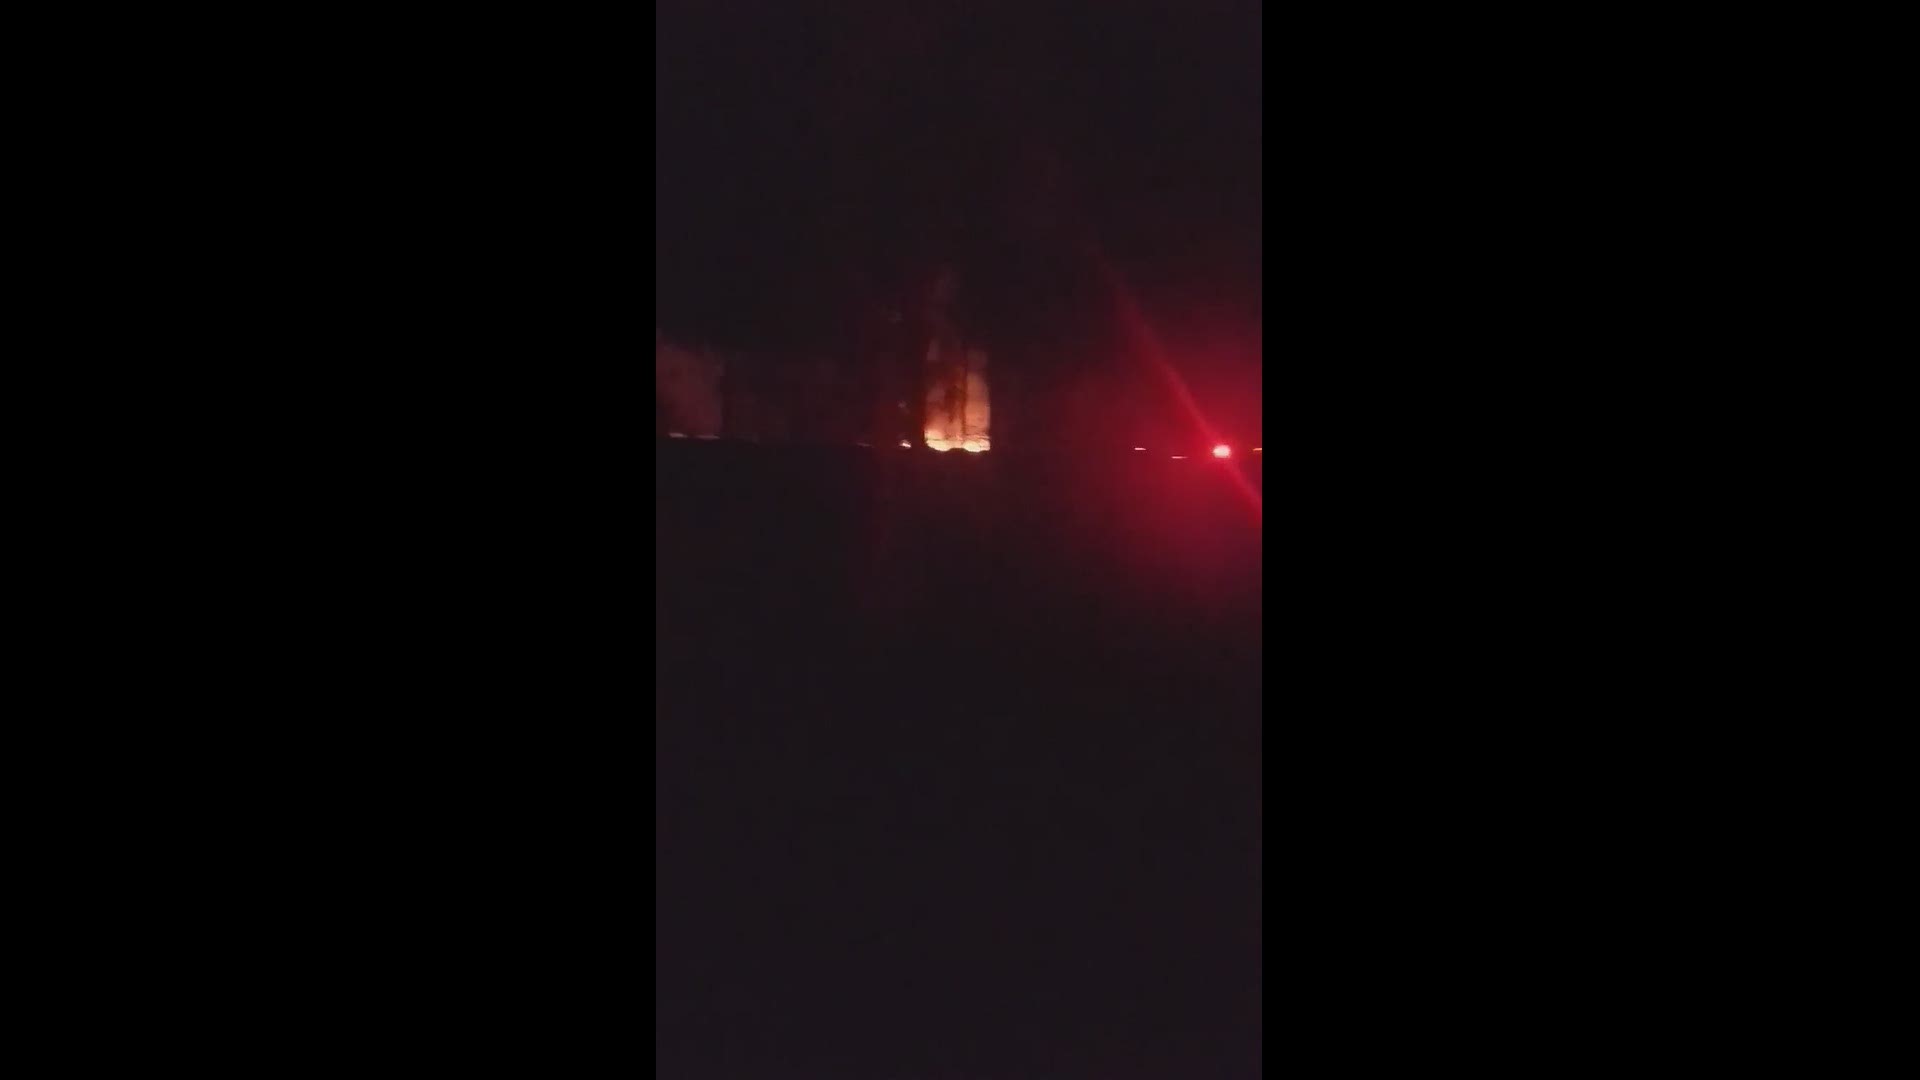 The fire was reported in the 14400 block of New Kings Road before 8 p.m., according to the Jacksonville Fire and Rescue Department.